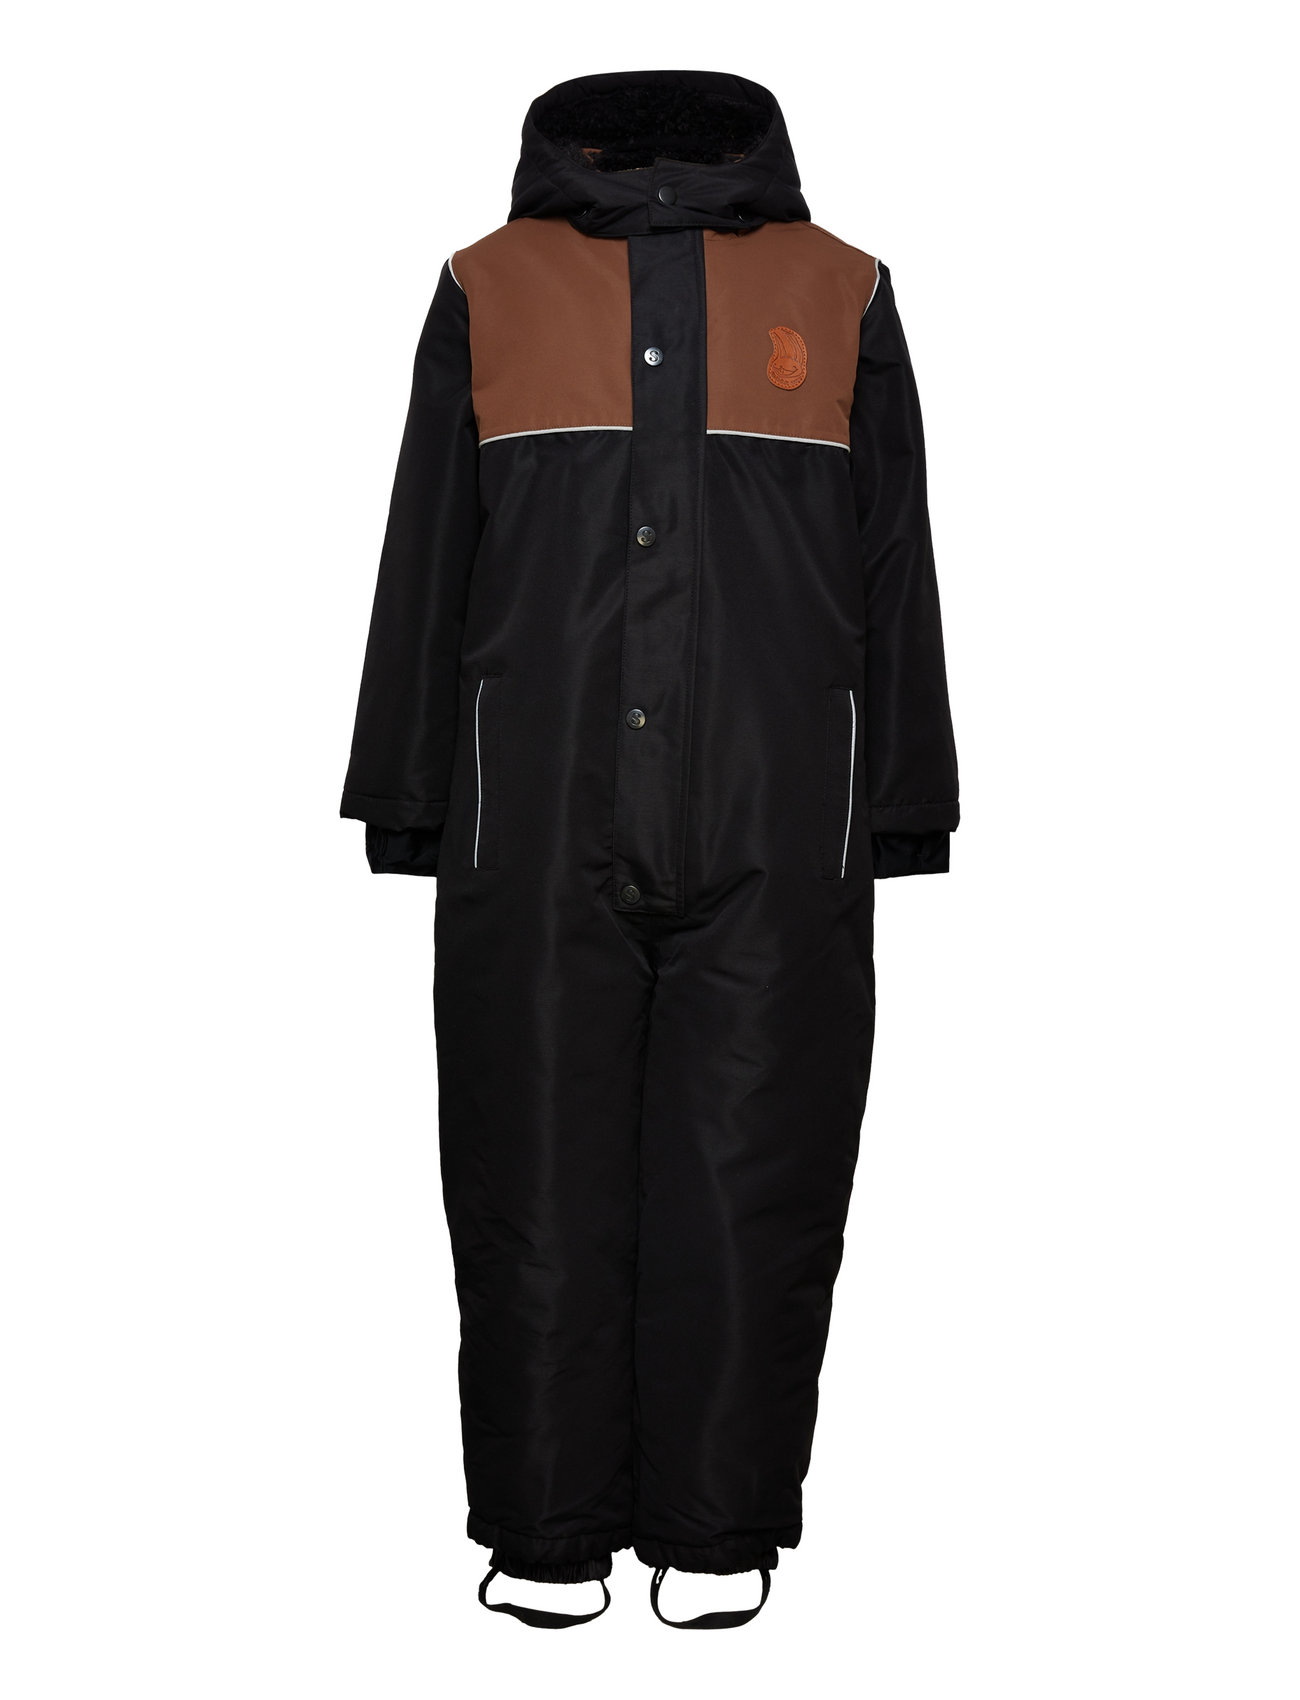 Sgcarl Snowsuit Outerwear Coveralls Softshell Coveralls Black Soft Gallery